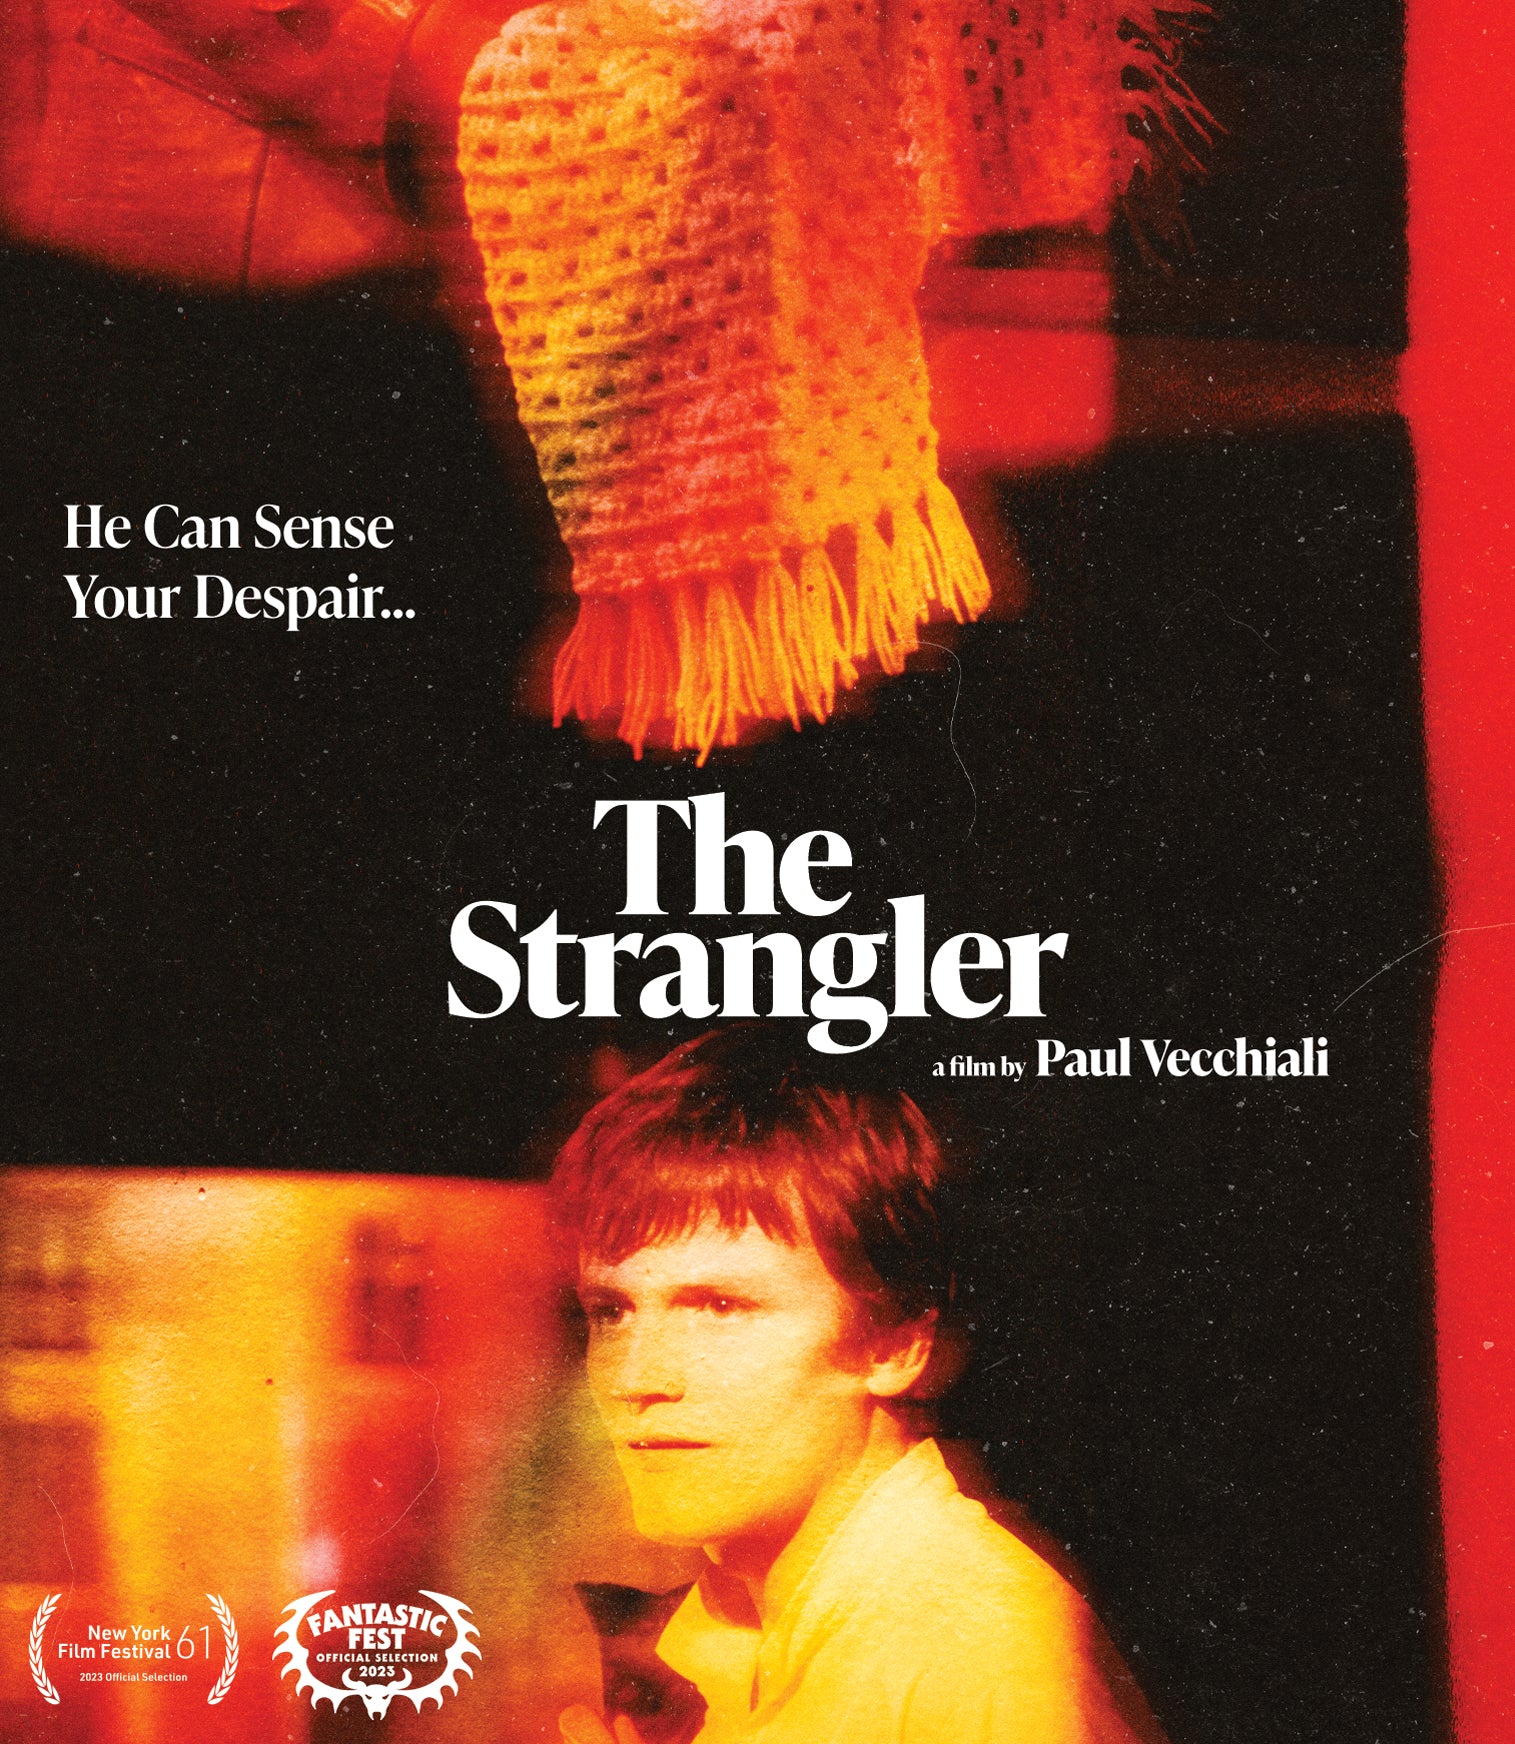 THE STRANGLER (LIMITED EDITION) BLU-RAY